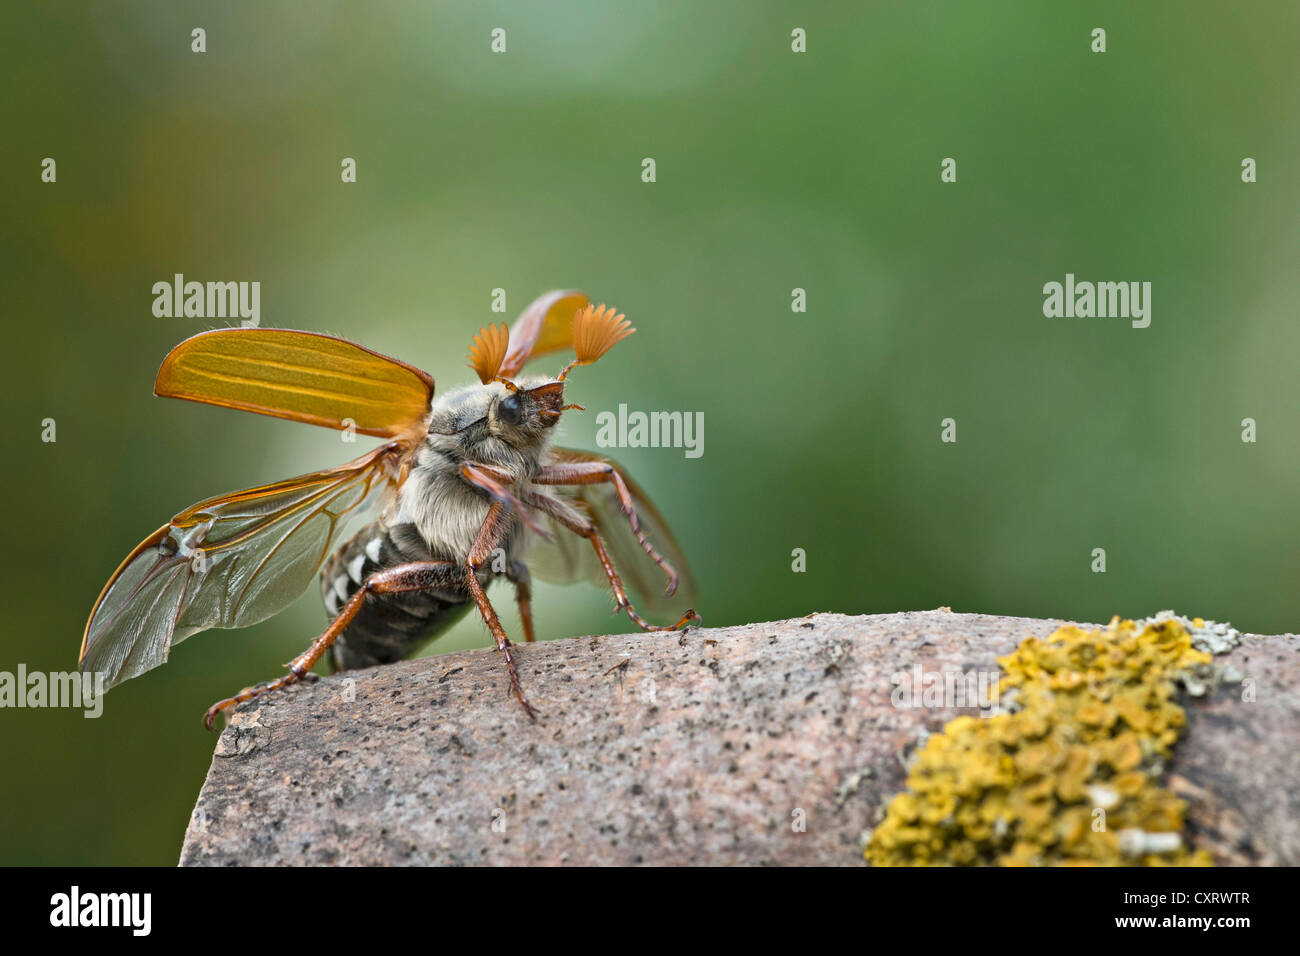 Cockchafer (Melolontha melolontha), taking off, Guxhagen, Hesse, Germany, Europe Stock Photo